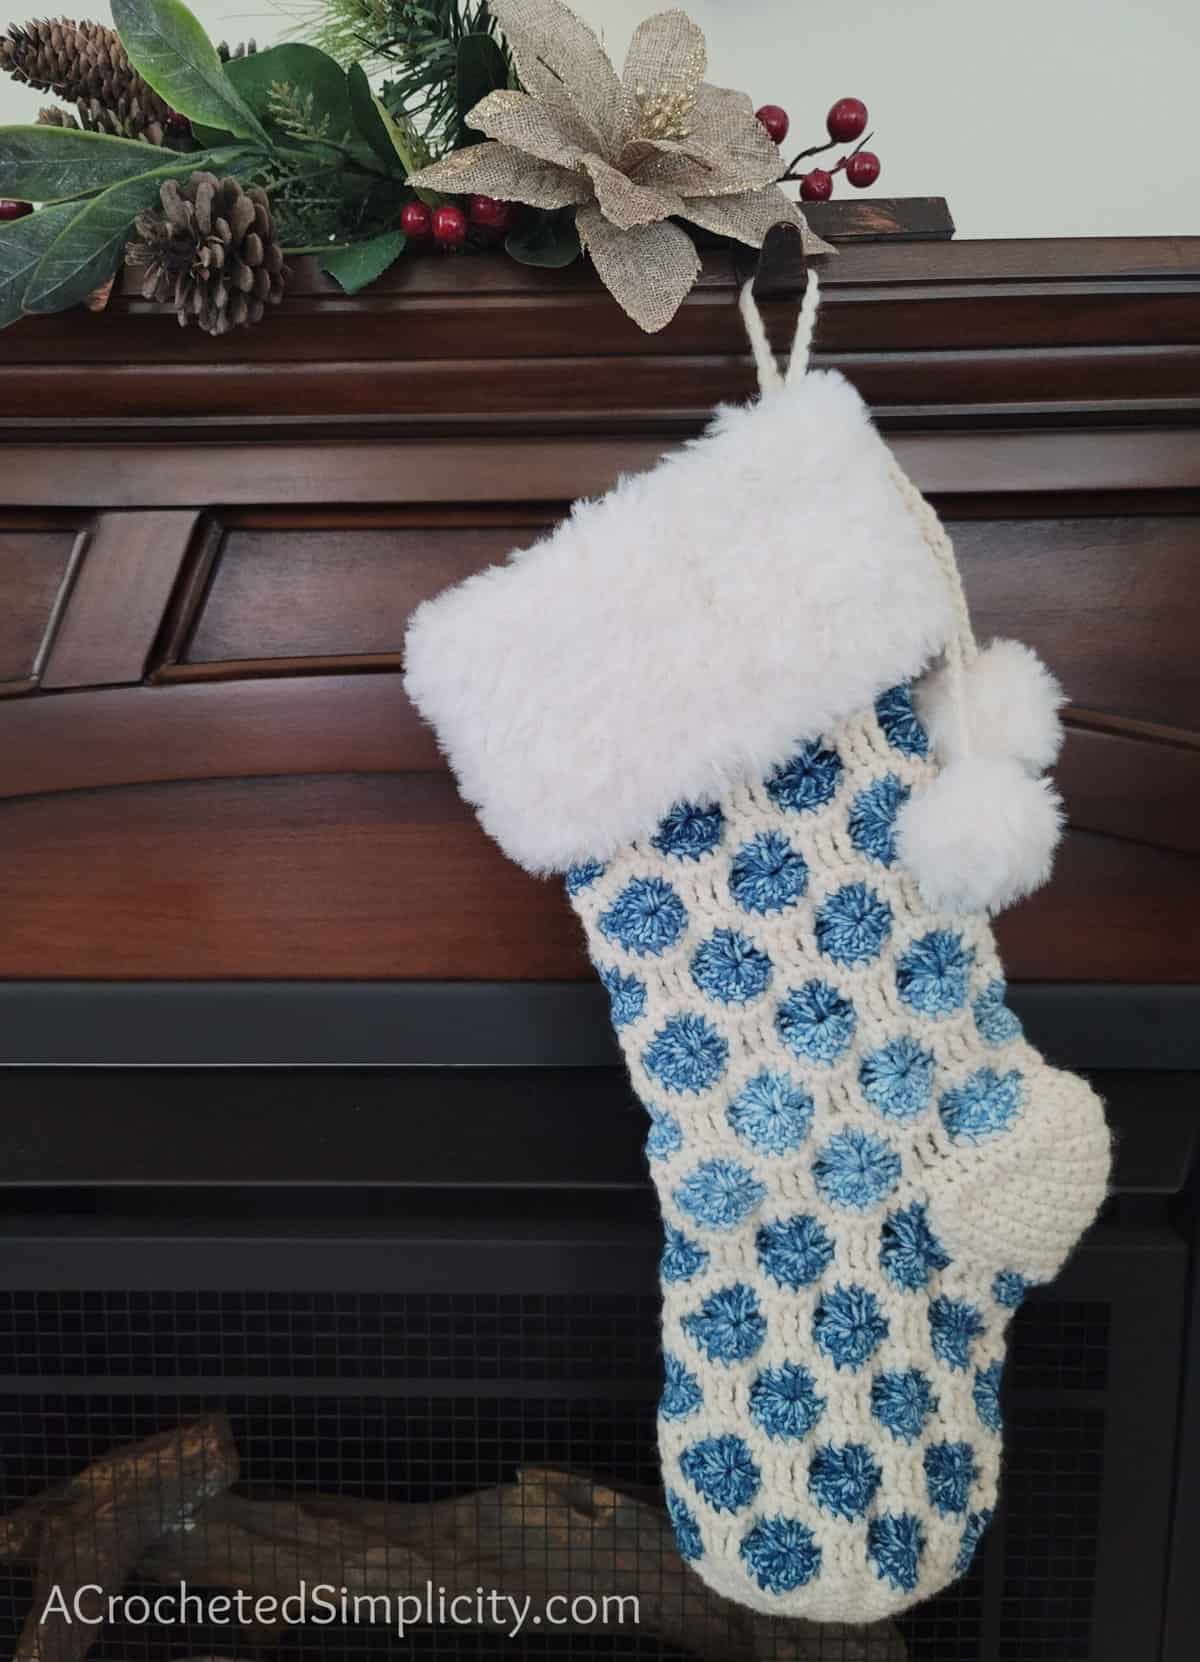 Free Crochet Stocking Pattern - Joyful Textures Christmas Stocking by A Crocheted Simplicity #crochetcatherineswheel #crochetstocking #plaidstocking #farmhouseplaid #farmhousecrochet #crochetchristmas #crochetchristmasstocking #freecrochetpattern #crochet #handmadestocking #handmadechristmas